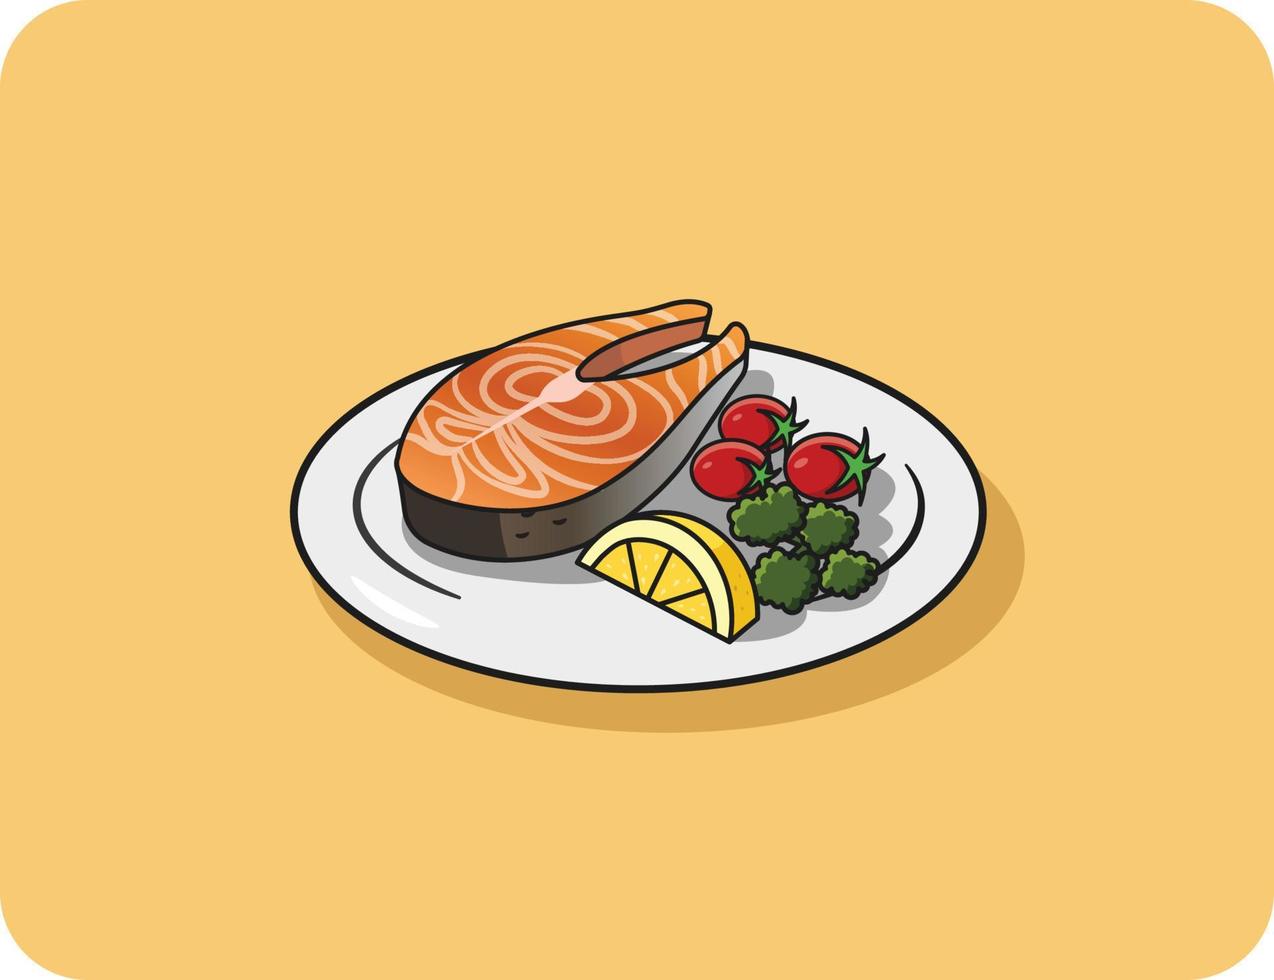 Grilled fish steak with tomato and lemon and vegetables served on a white plate, vector design and isolated background.